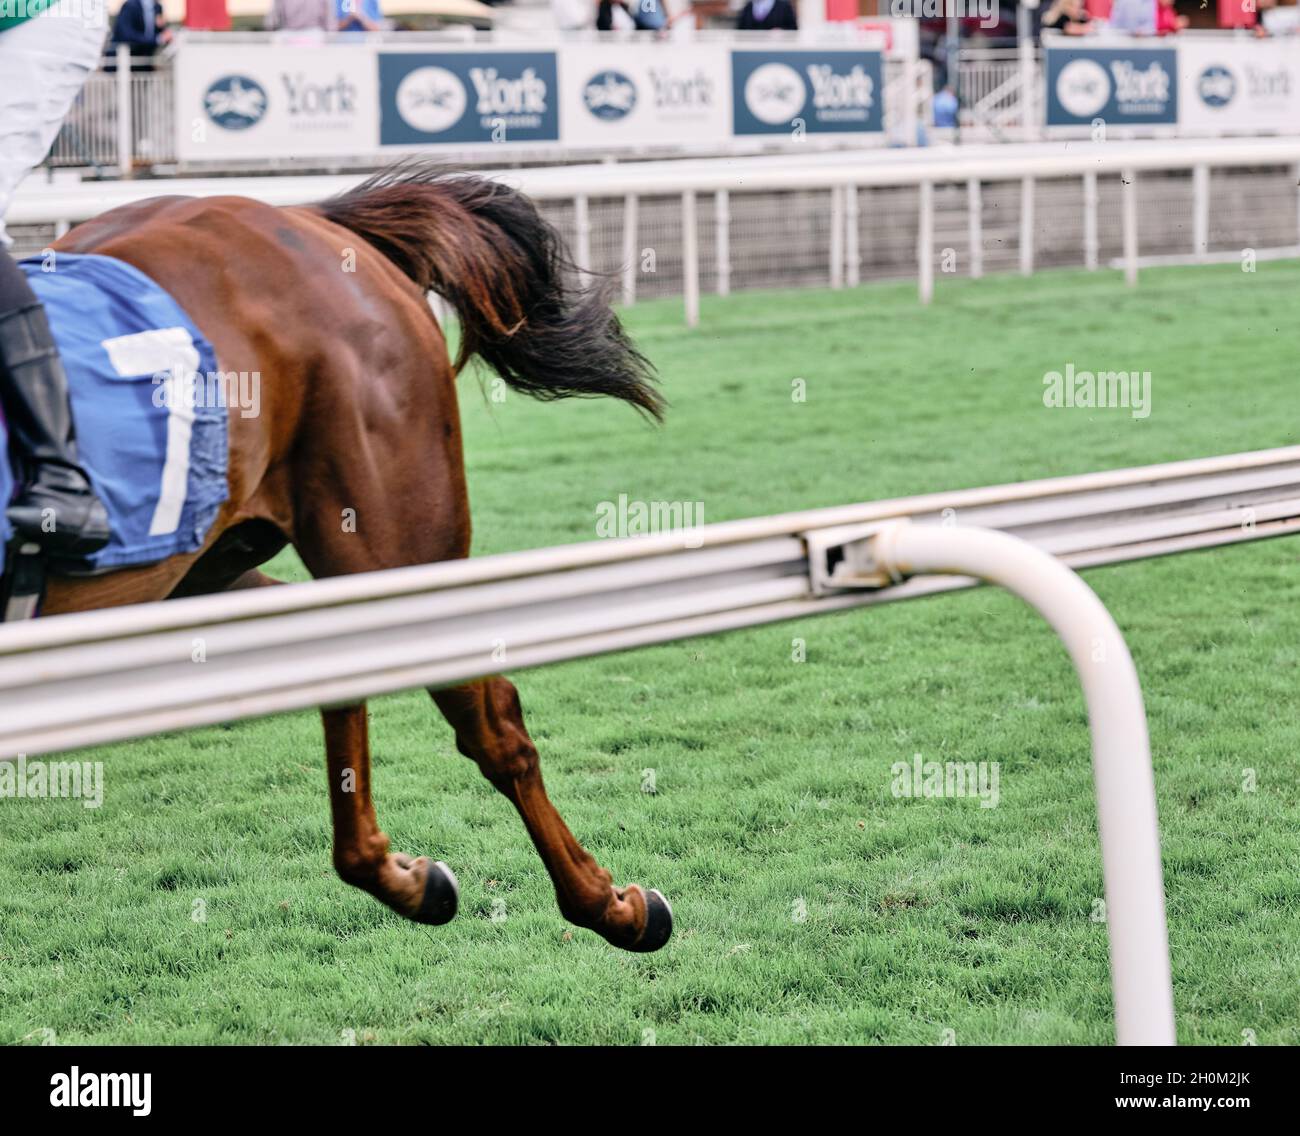 A fast race horse speeds passed and out of shot with just hind legs showing - horse racing odd quirky Stock Photo